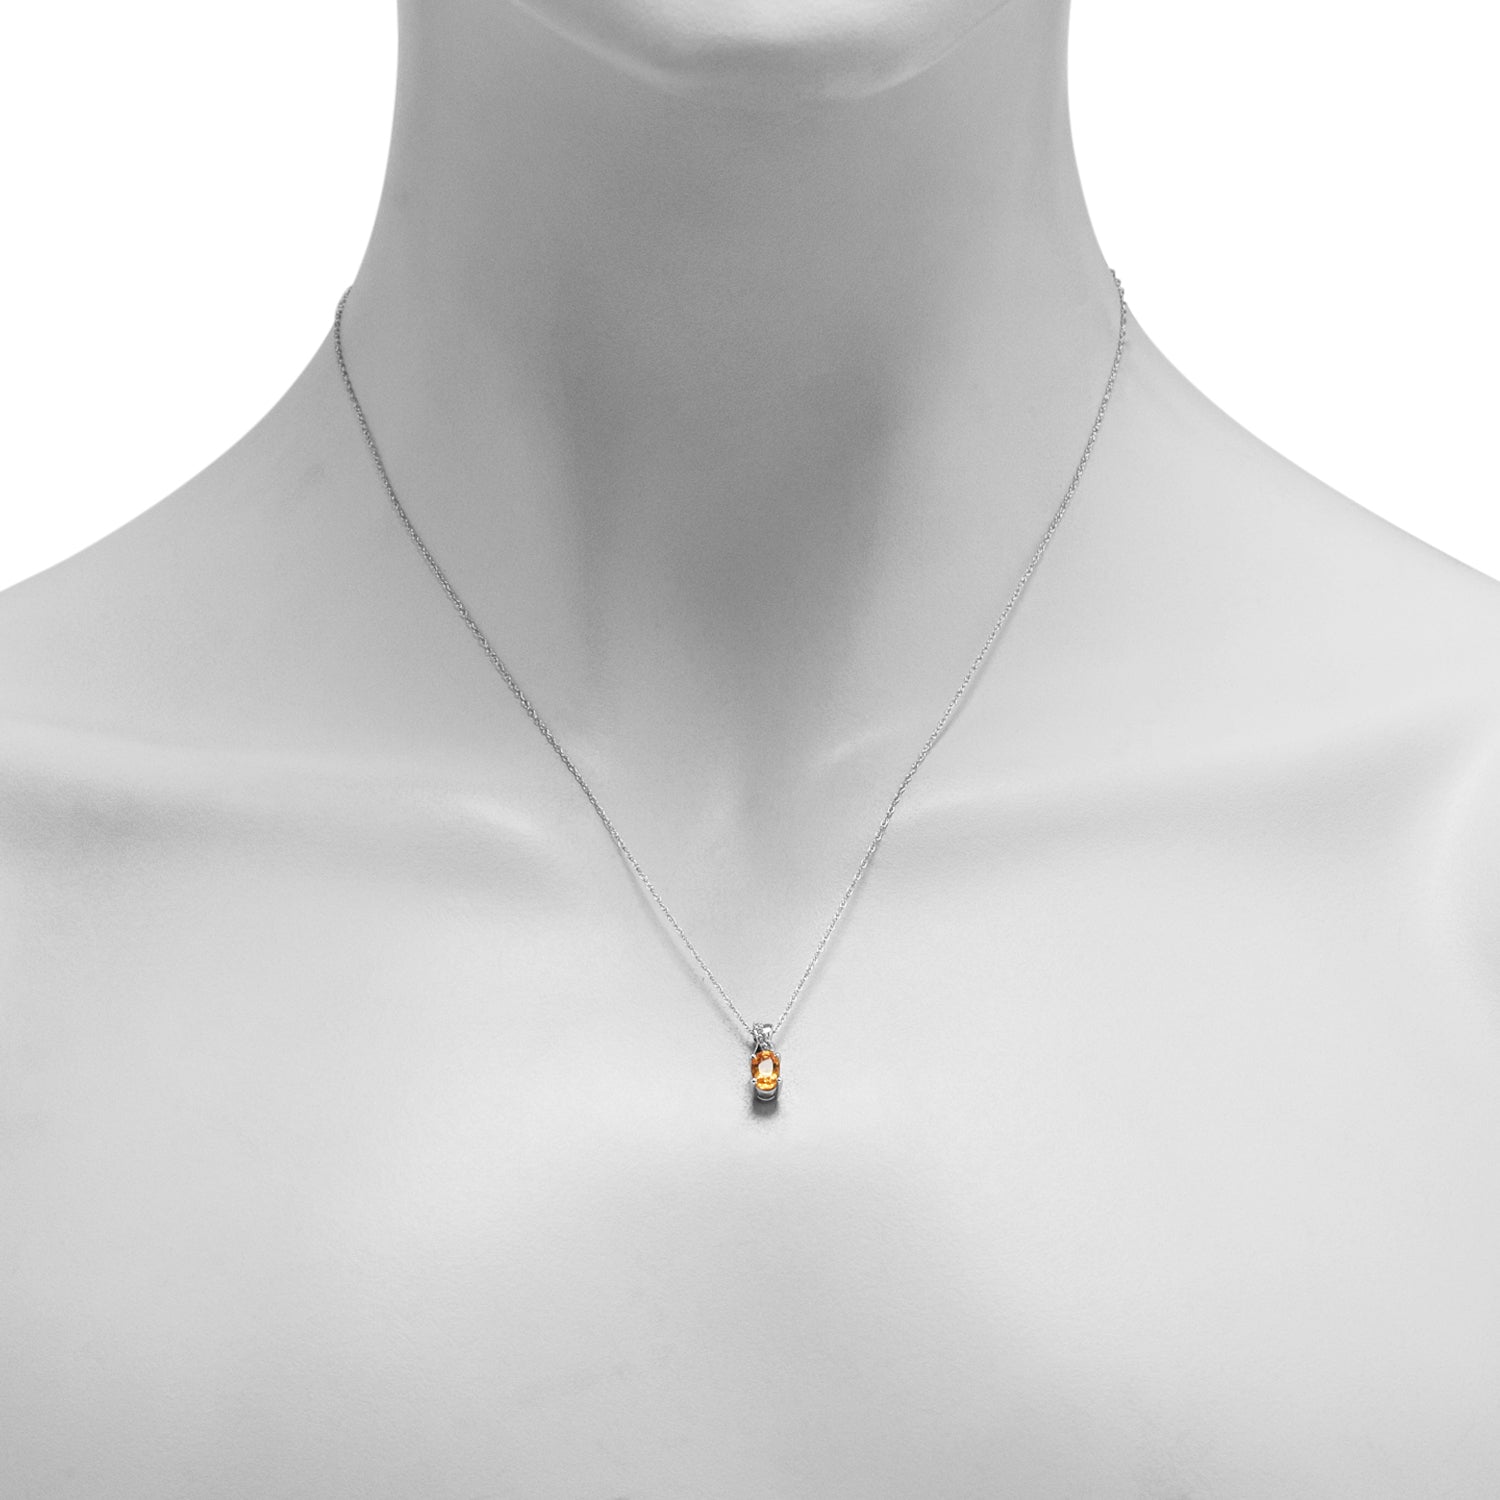 Oval Citrine Necklace in 10kt White Gold with Diamonds (1/20ct tw)